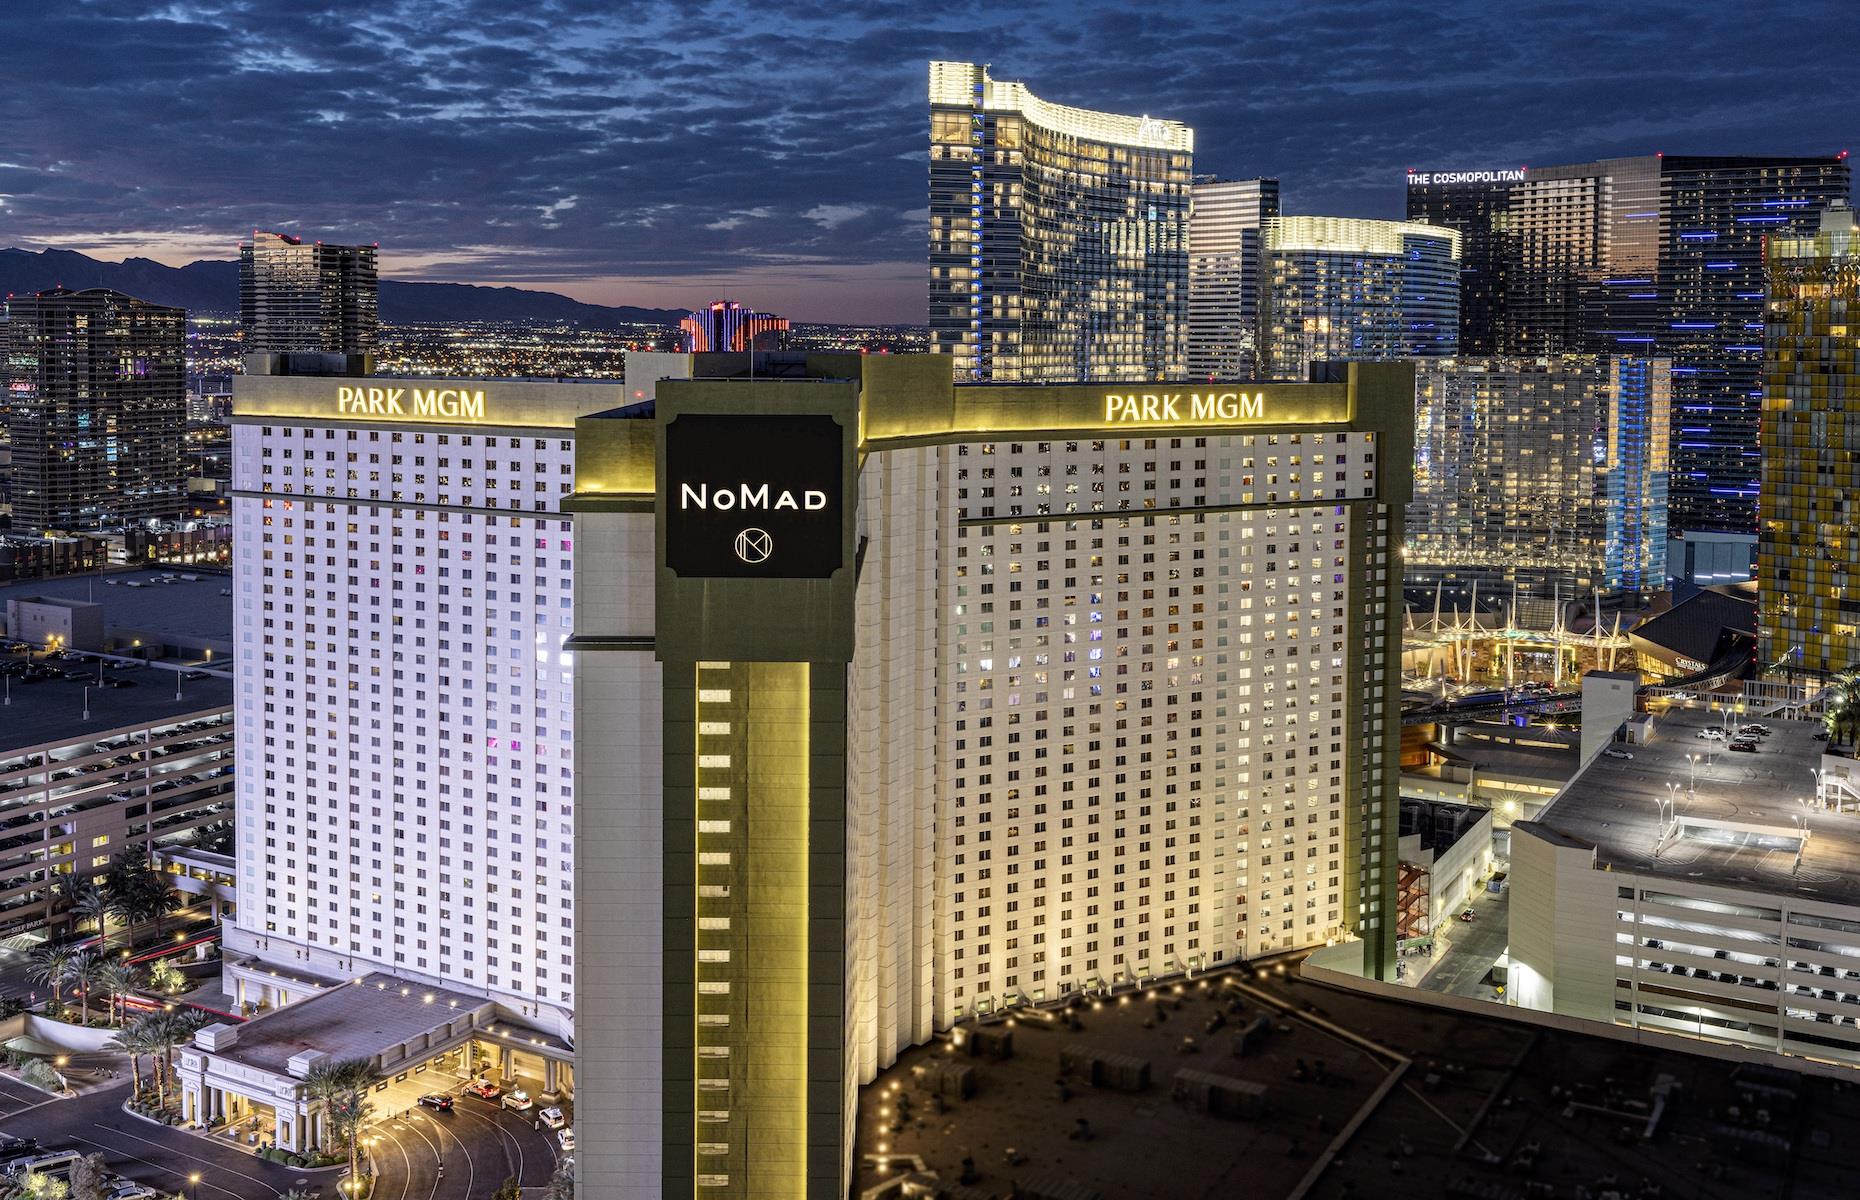 <p>Between them, Park MGM and NoMad Las Vegas have a total of 2,993 guest rooms and suites. Described as “two distinct luxury hotel experiences under one roof”, the two hotels opened in 2019 after a $550 million remodeling and rebranding of the former Monte Carlo Hotel by MGM Resorts International. Park MGM hosts the largest outpost of the Italian food market concept Eataly and it also boasted the first smoke-free casino on the Las Vegas Strip. Meanwhile, NoMad is all about offering guests a smaller, more boutique luxury experience. </p>